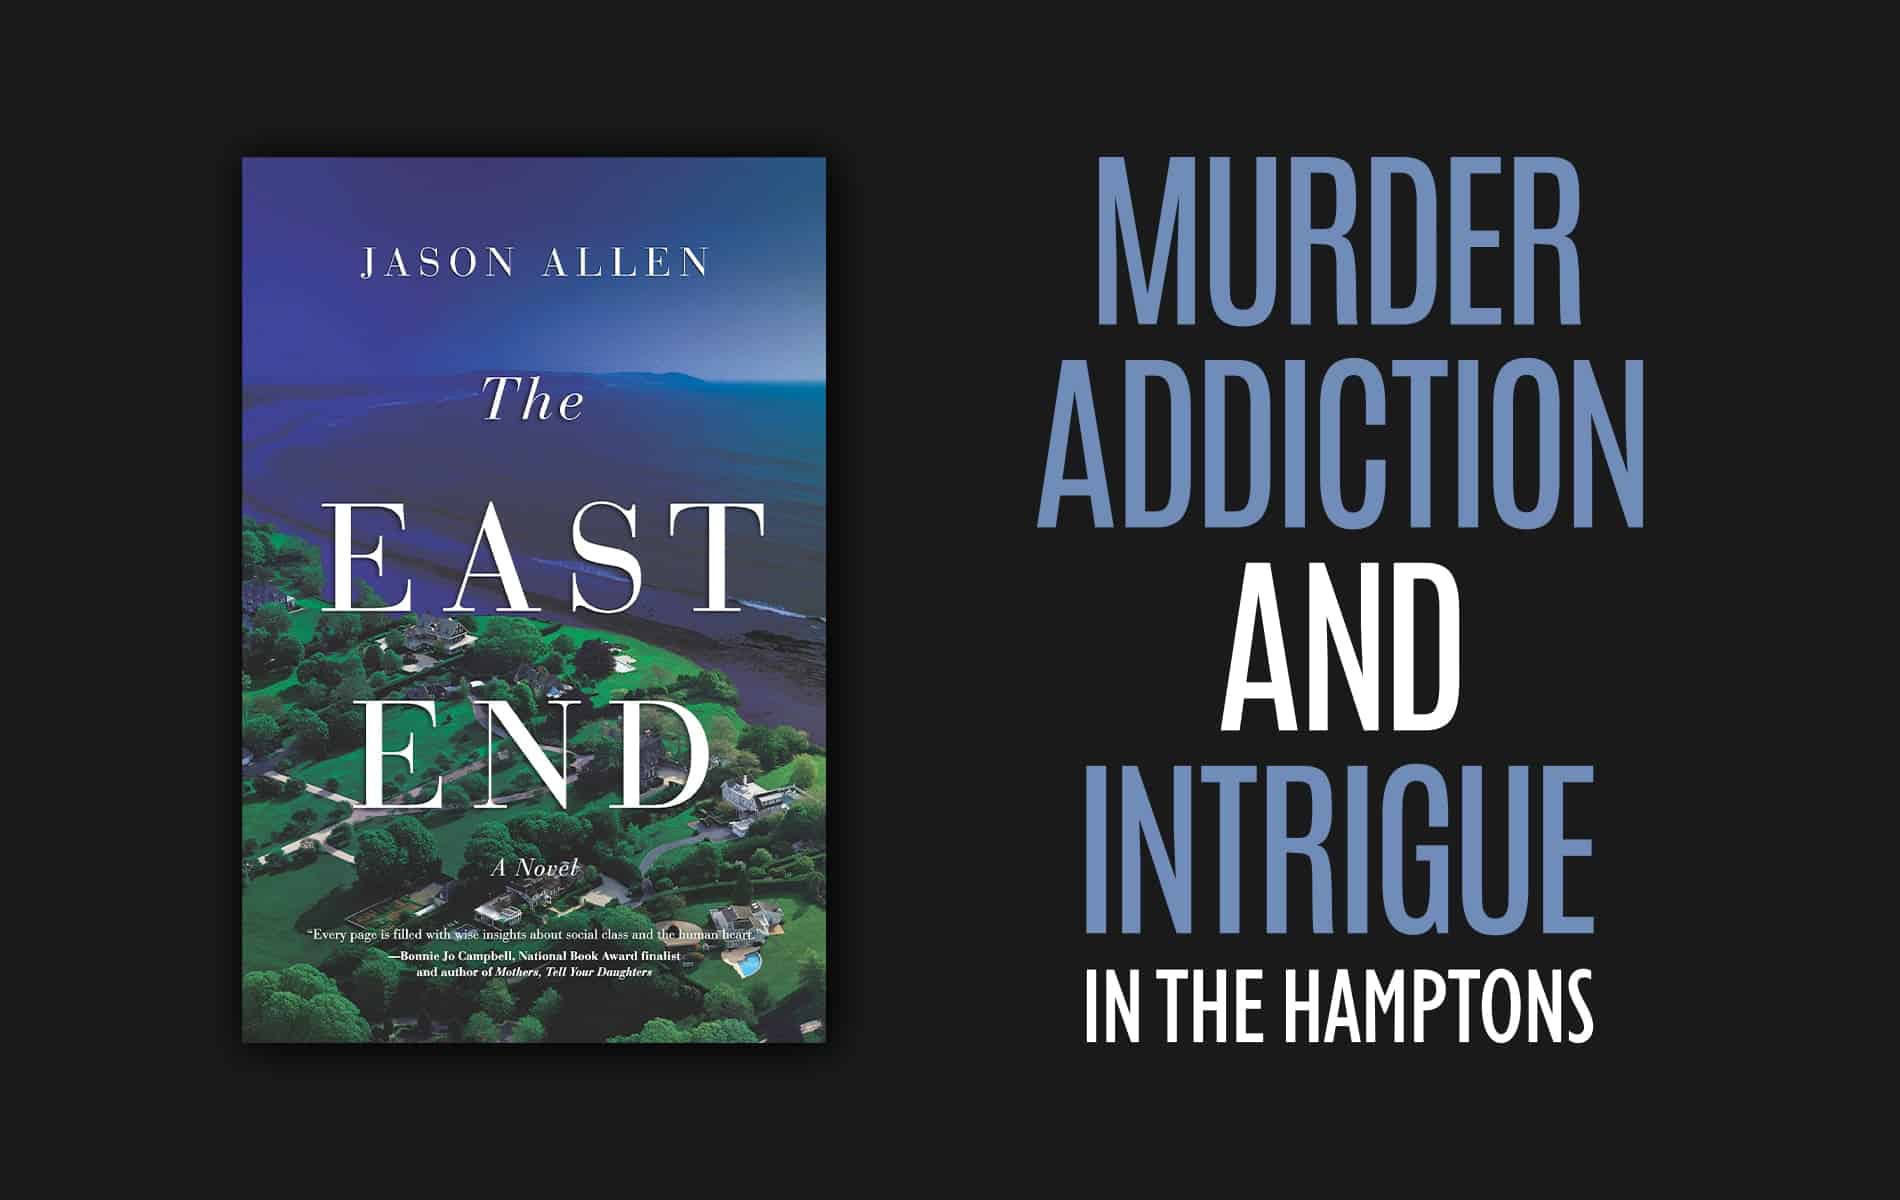 Murder, Addiction, and Intrigue in the Hamptons